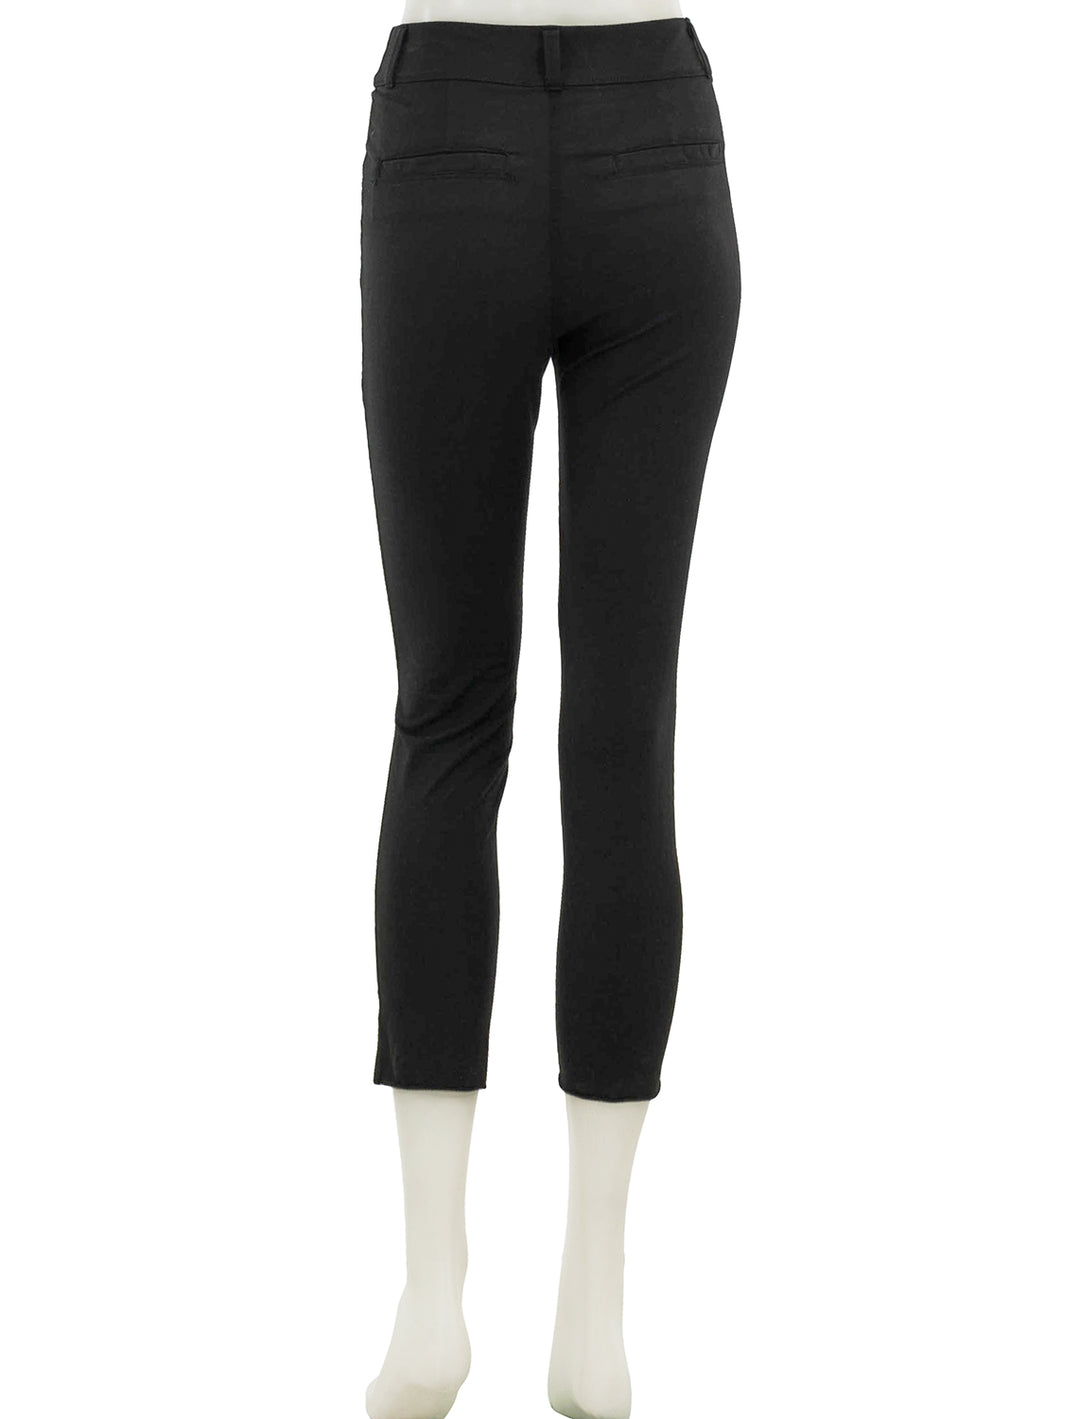 Eaze Wear by Antthony Seamed Legging with Pockets